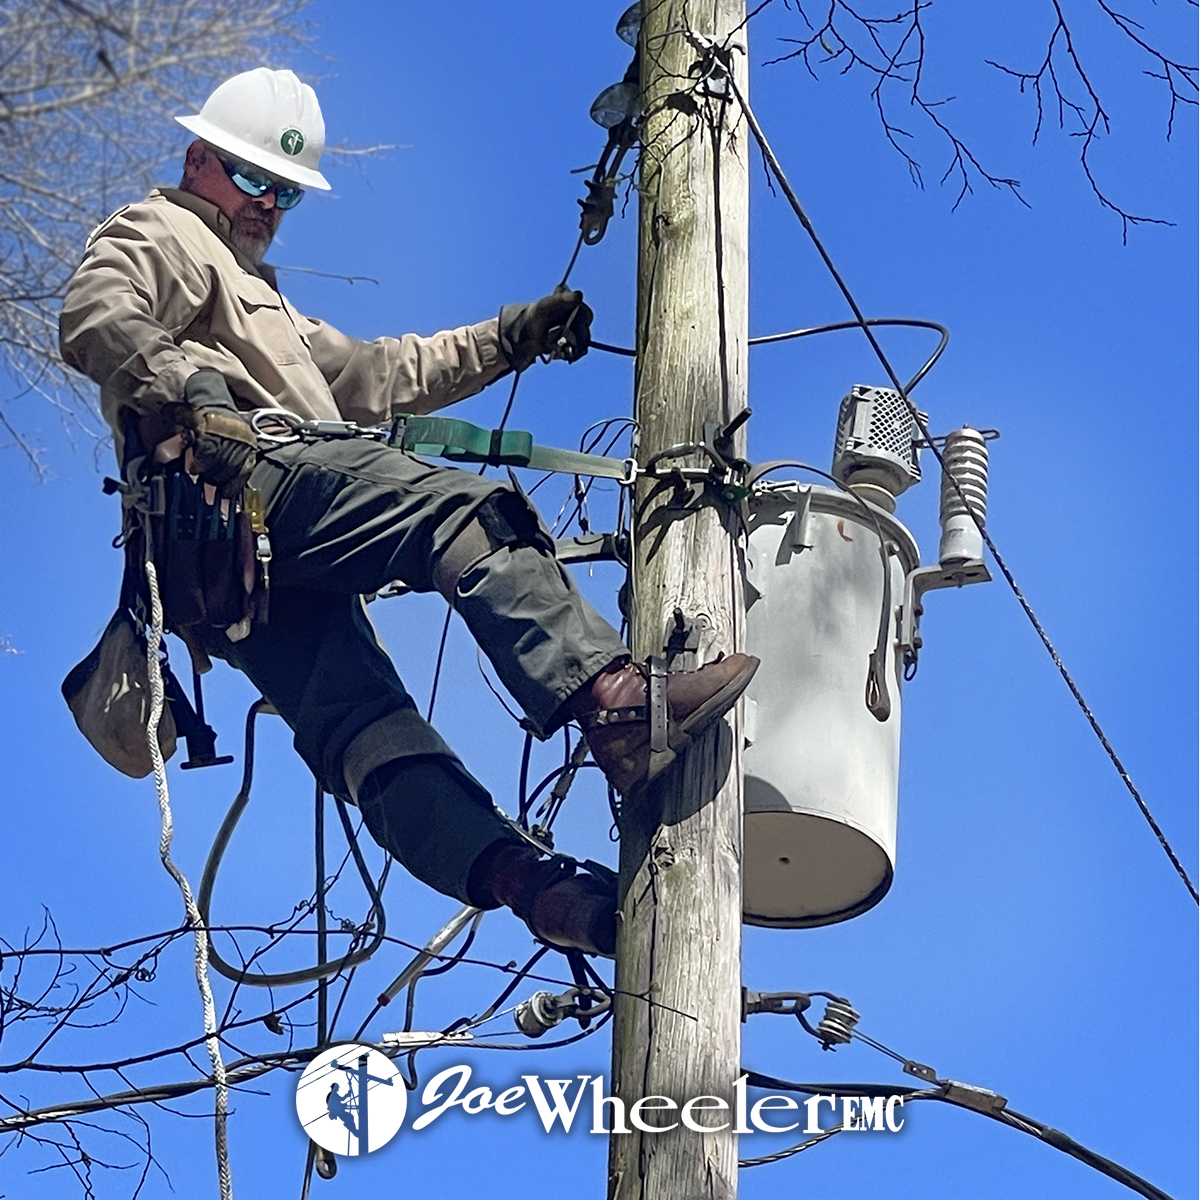 Today we celebrate the men who work through any conditions 24/7/365 to keep the lights on. Happy Lineworker Appreciation Day to all lineworkers everywhere!
#ThankALineworker #thankalineman #LineworkerAppreciationDay